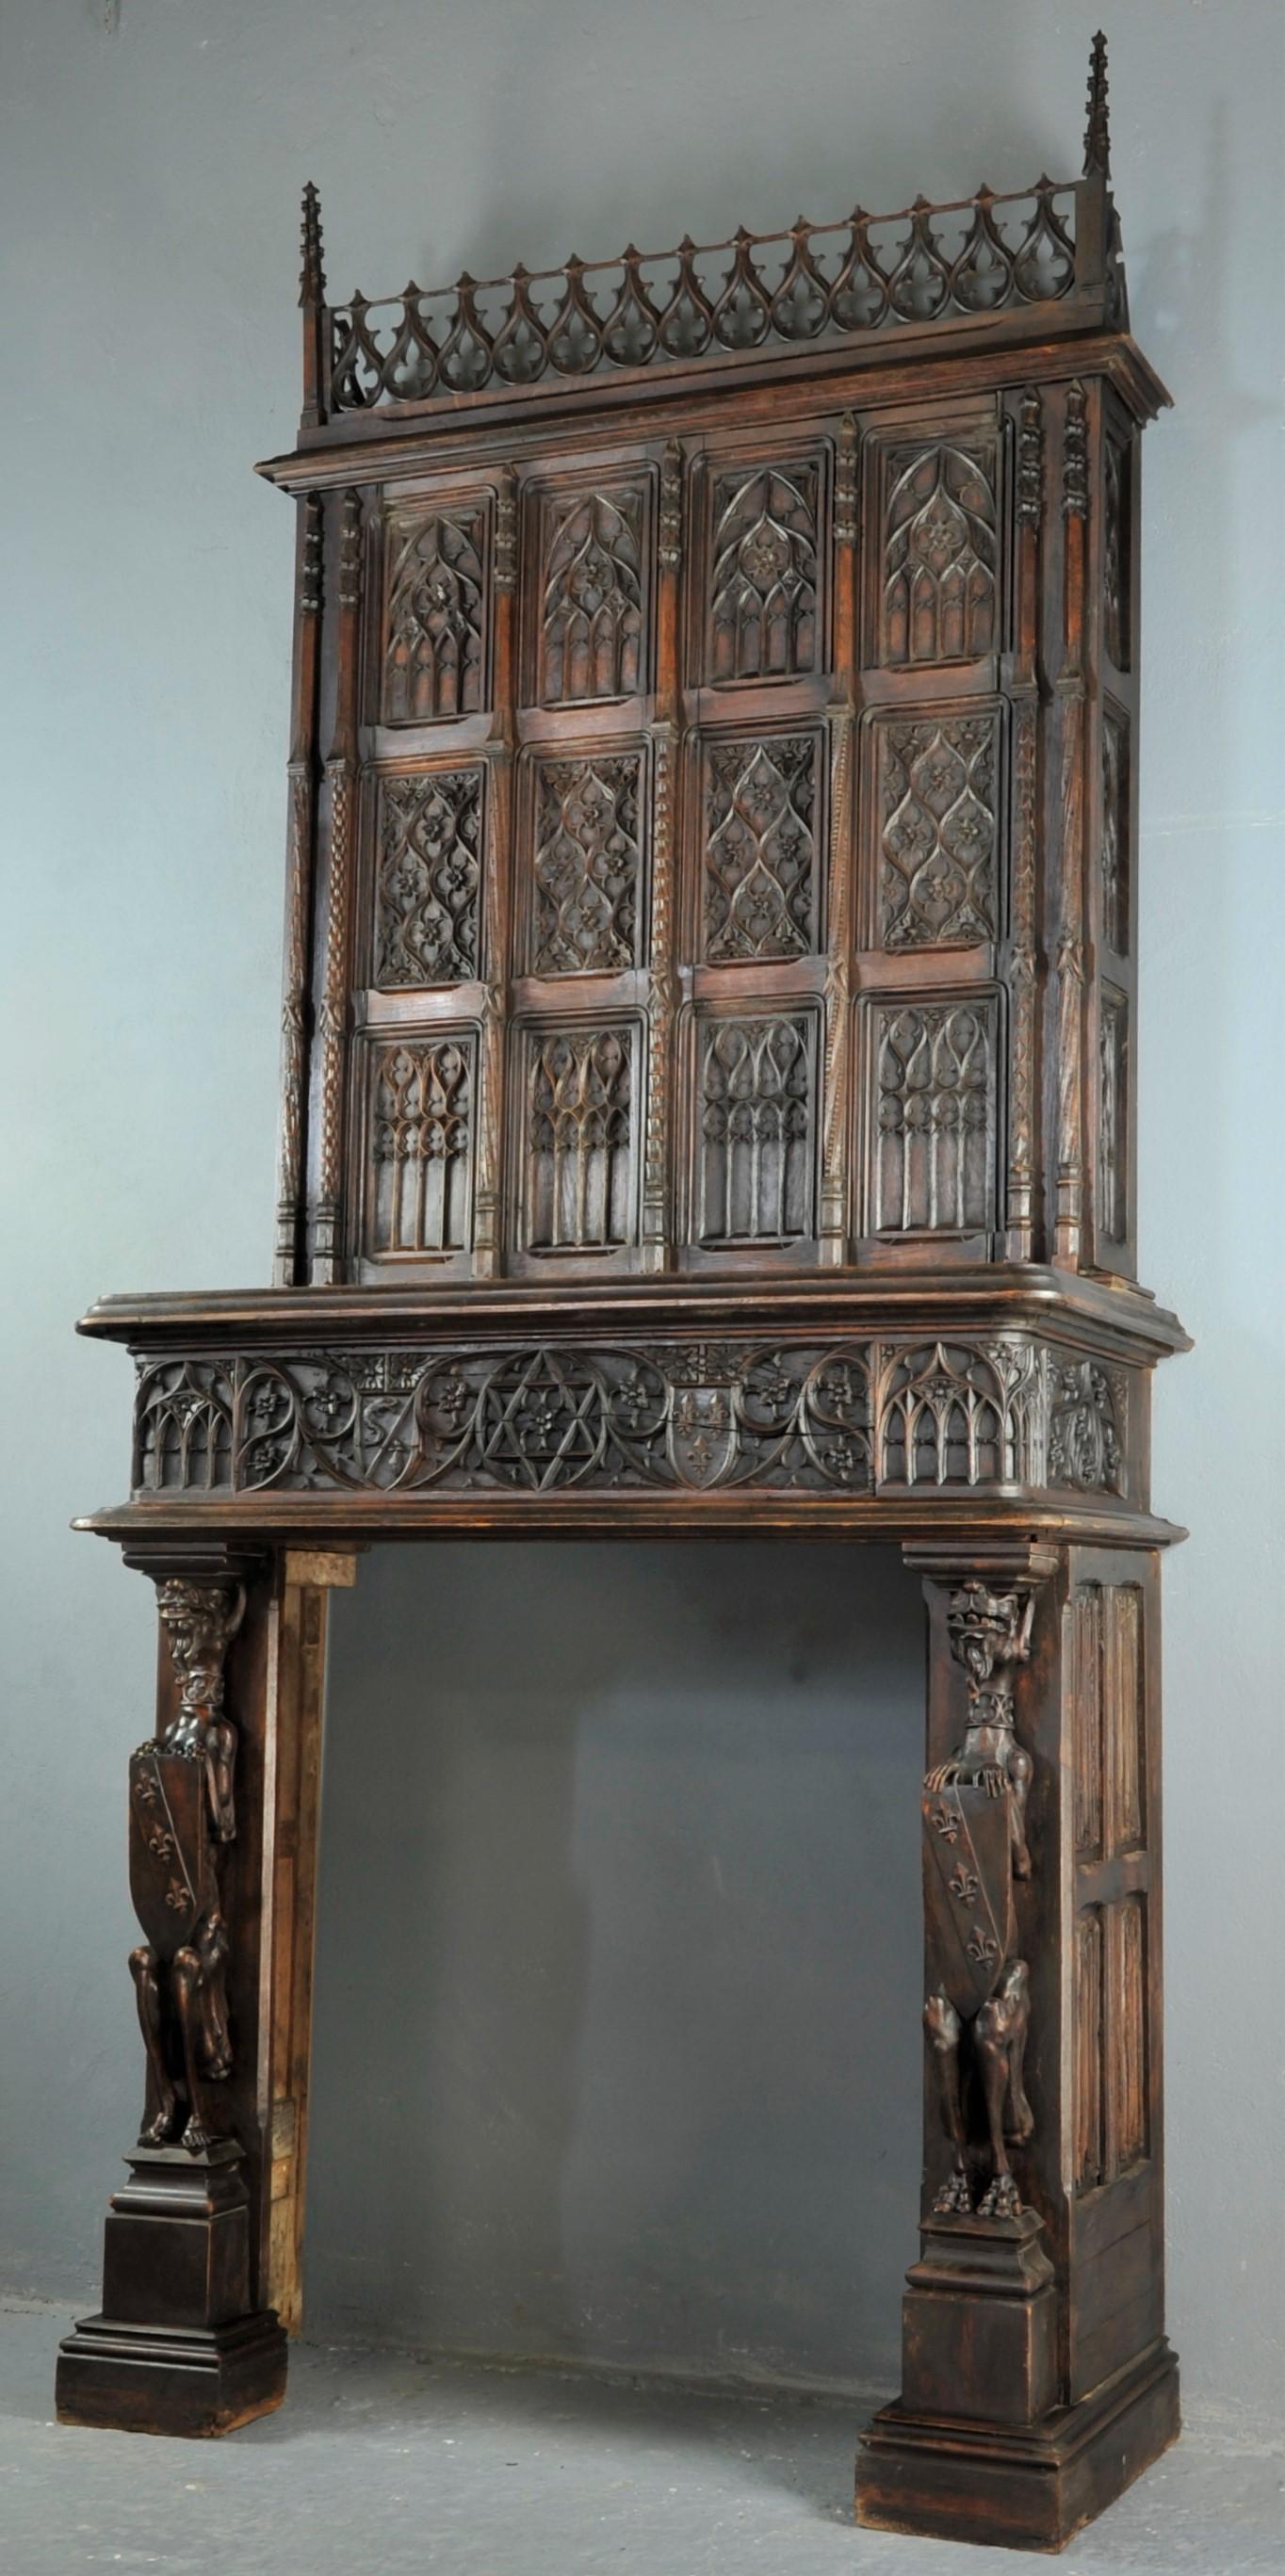 This delicately, rich carved Gothic fireplace dates back to the 17th century. Probably reassembled during the 19th century. The overmantel is decorated with 12 panels and on both sides are two slender columns. Panels are elaborately carved.  Columns